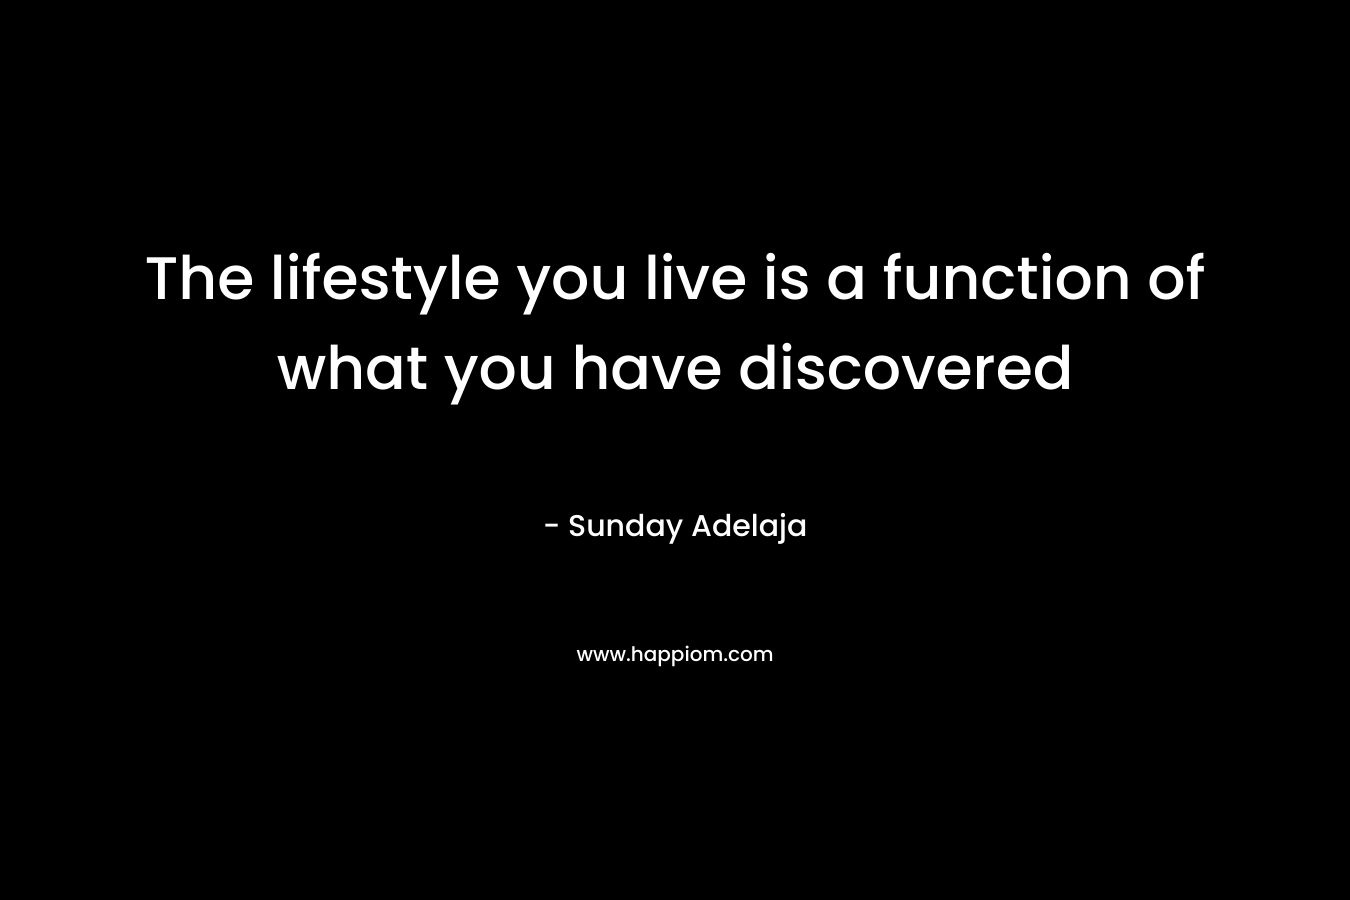 The lifestyle you live is a function of what you have discovered